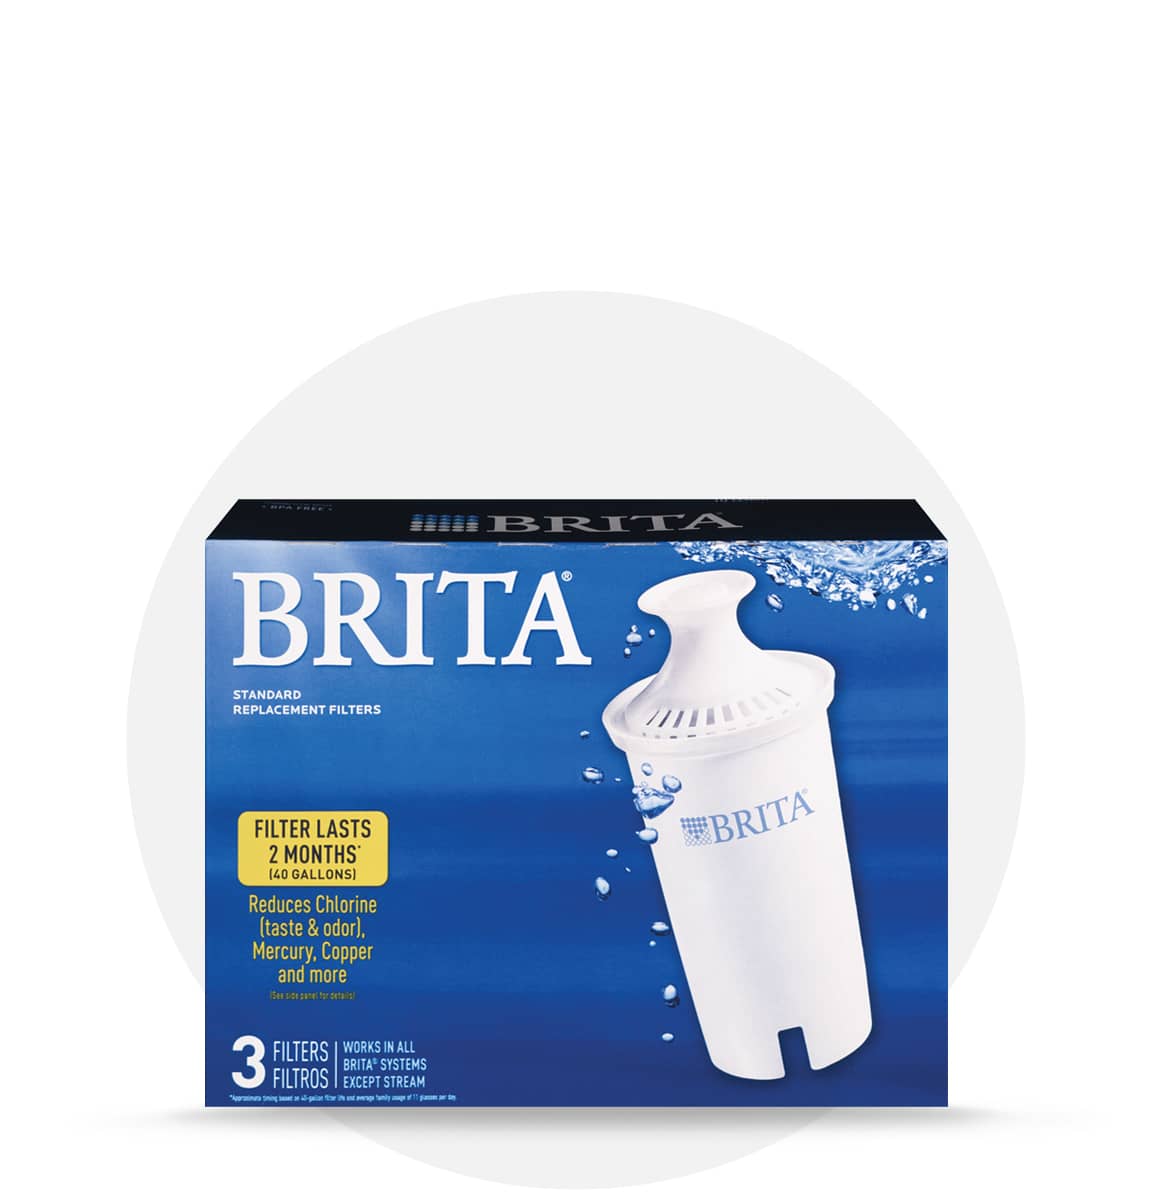 Shop now for Brita® Standard Water Replacement Filters